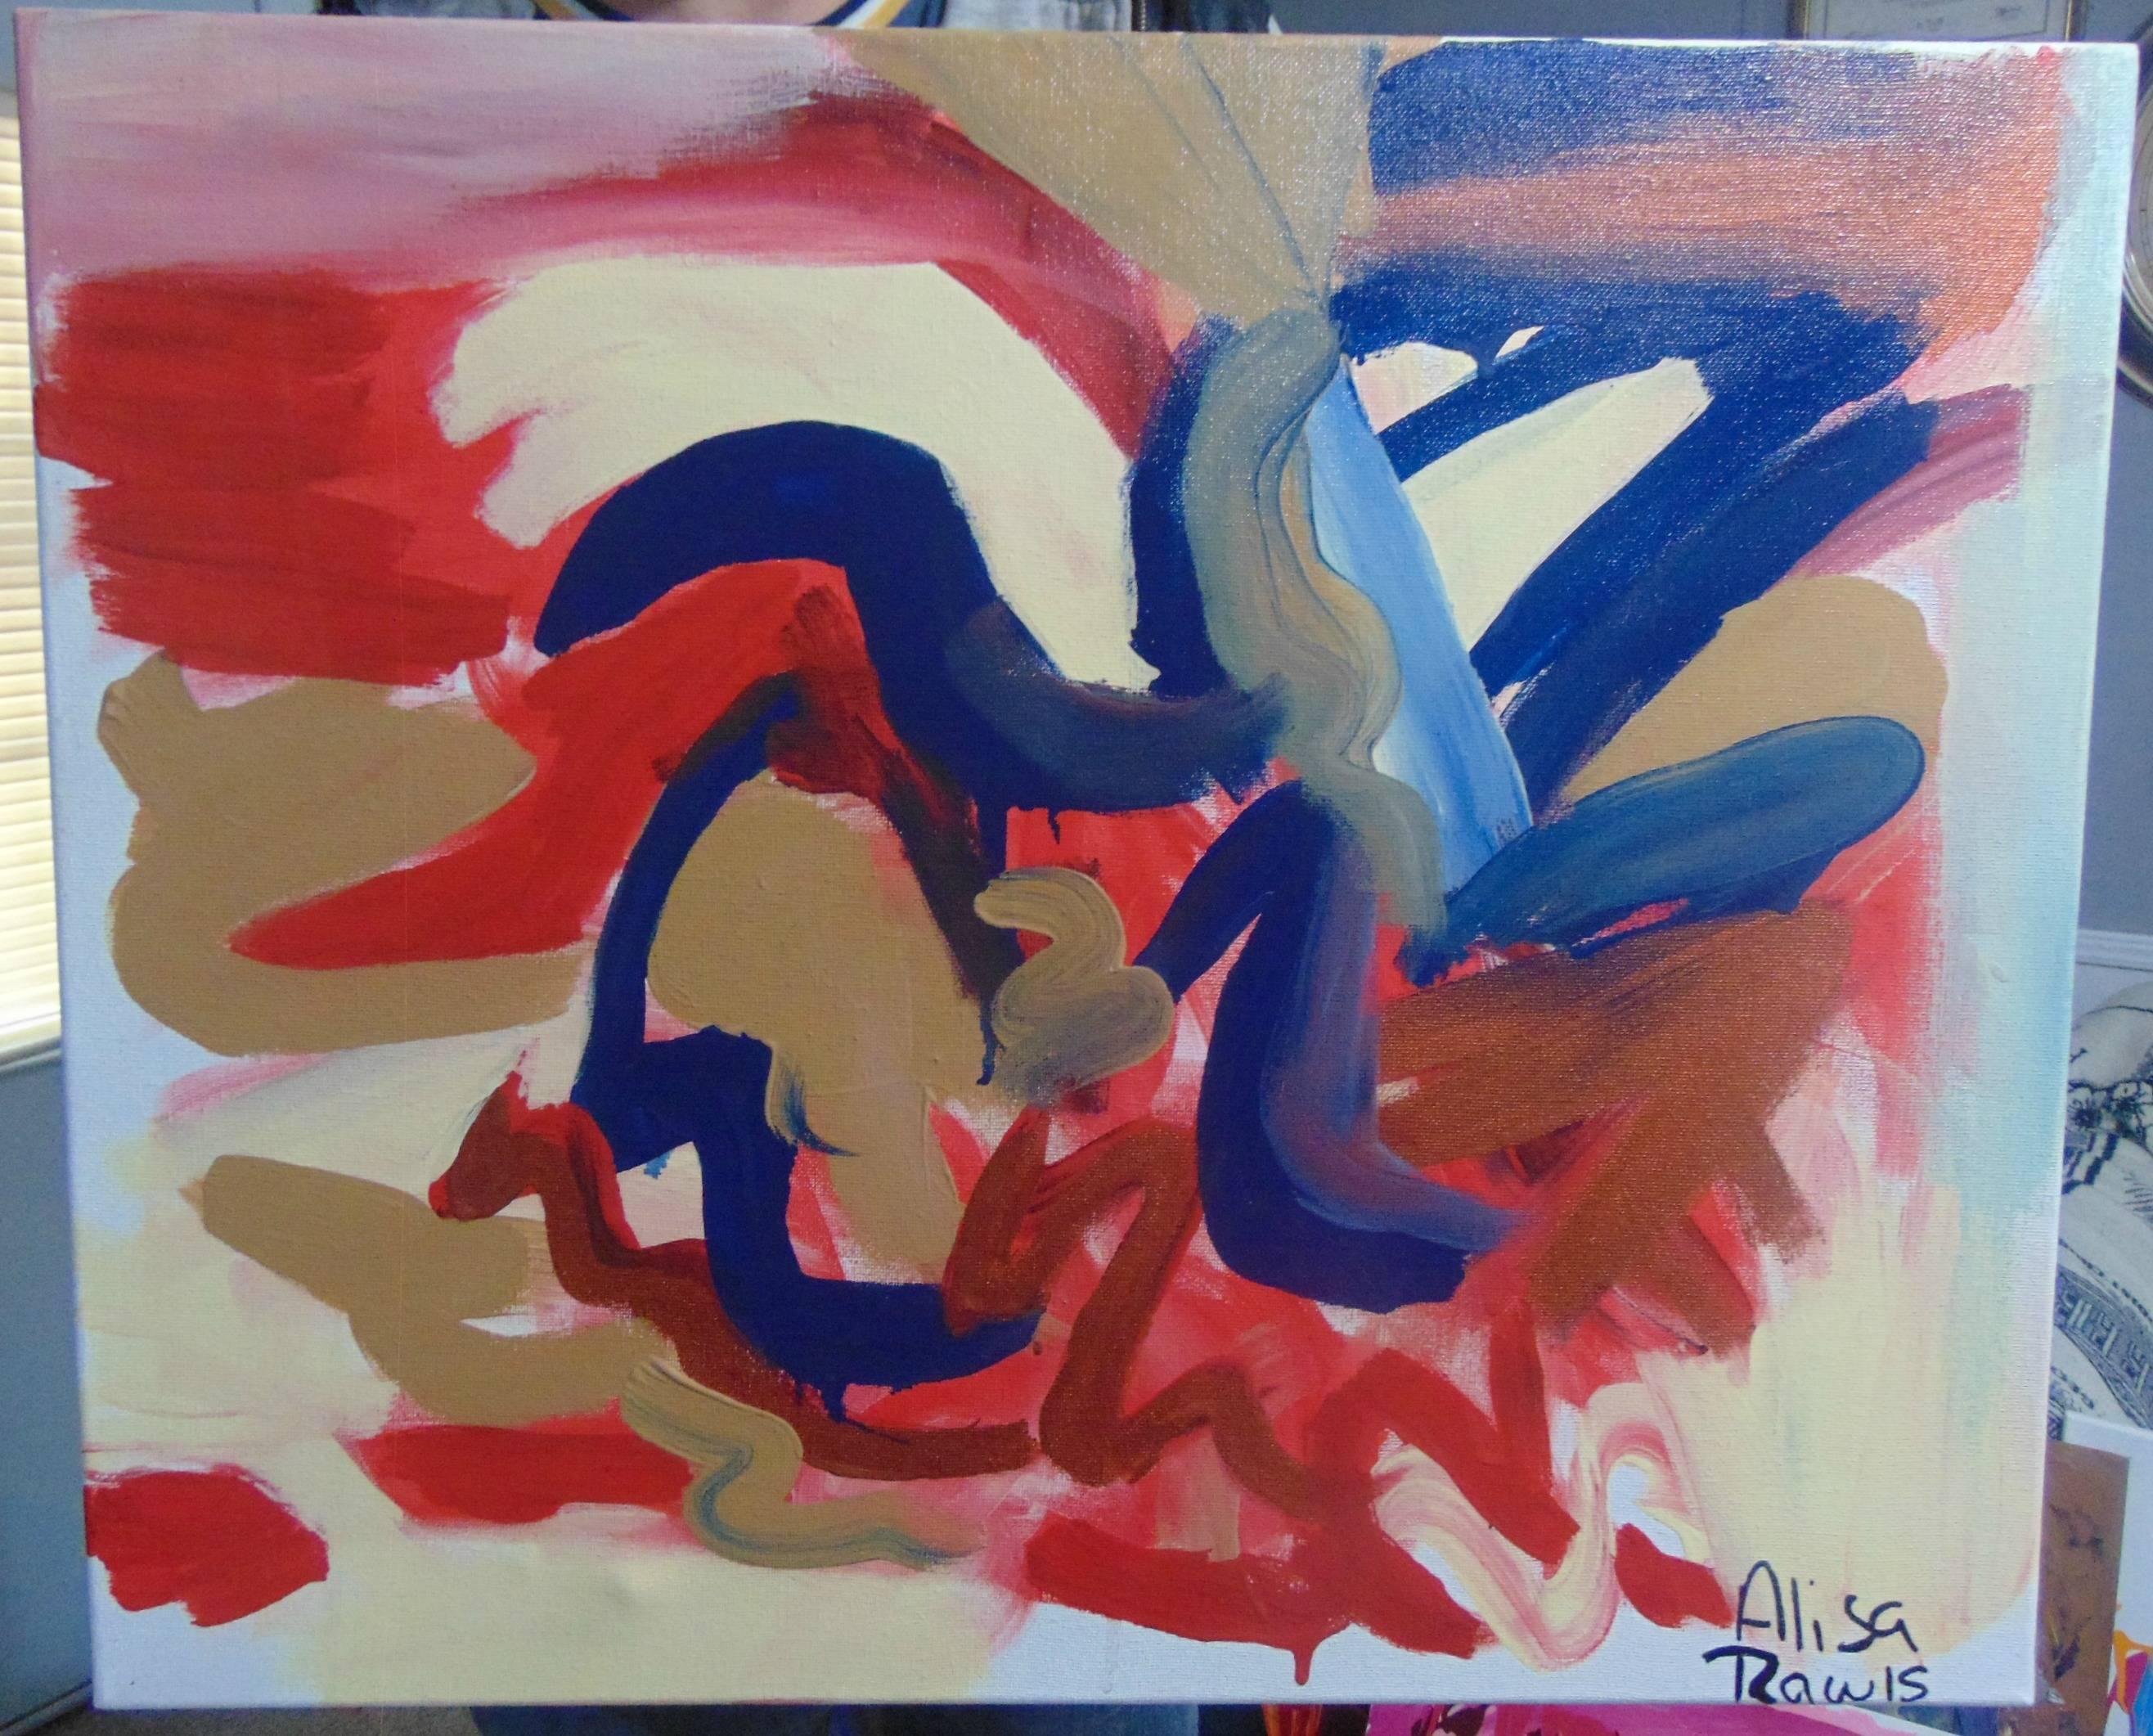 Alisa Rawls Abstract Painting - El Corazon, Original, Acrylic Pastel Oil Paint on Canvas, Heart Abstract. Signed